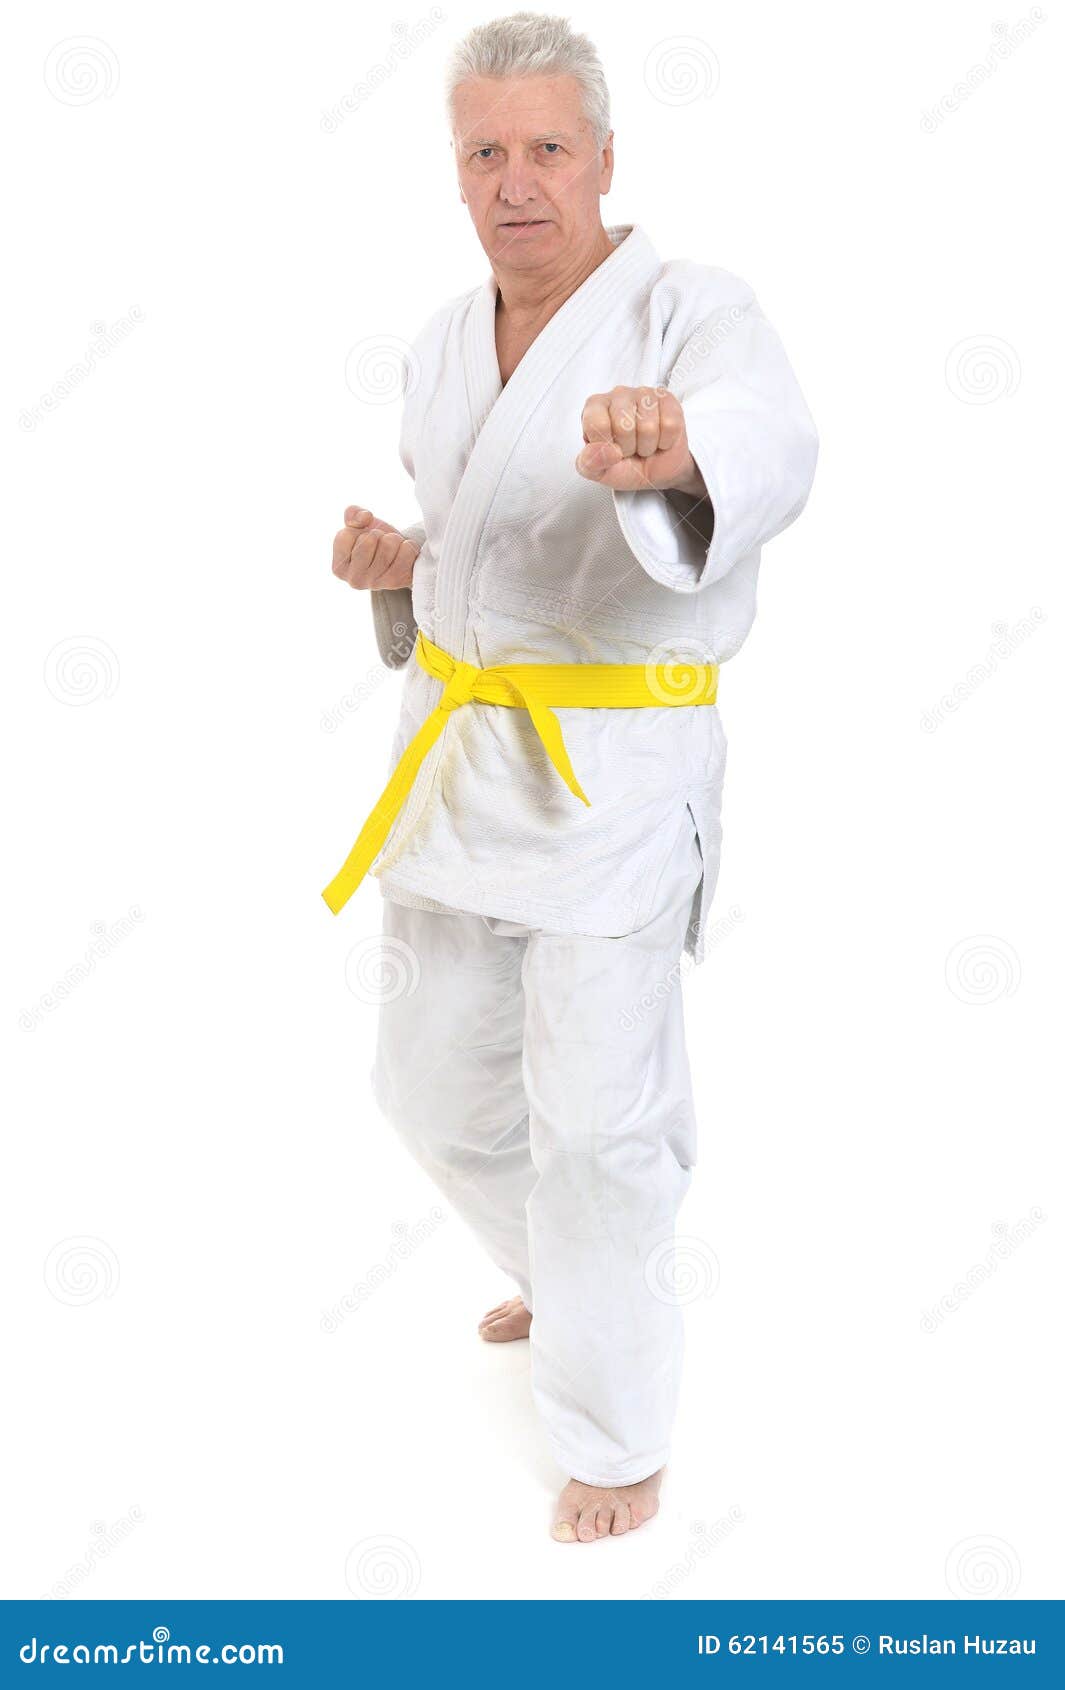 What's the Best Martial Art for Self-Defense?